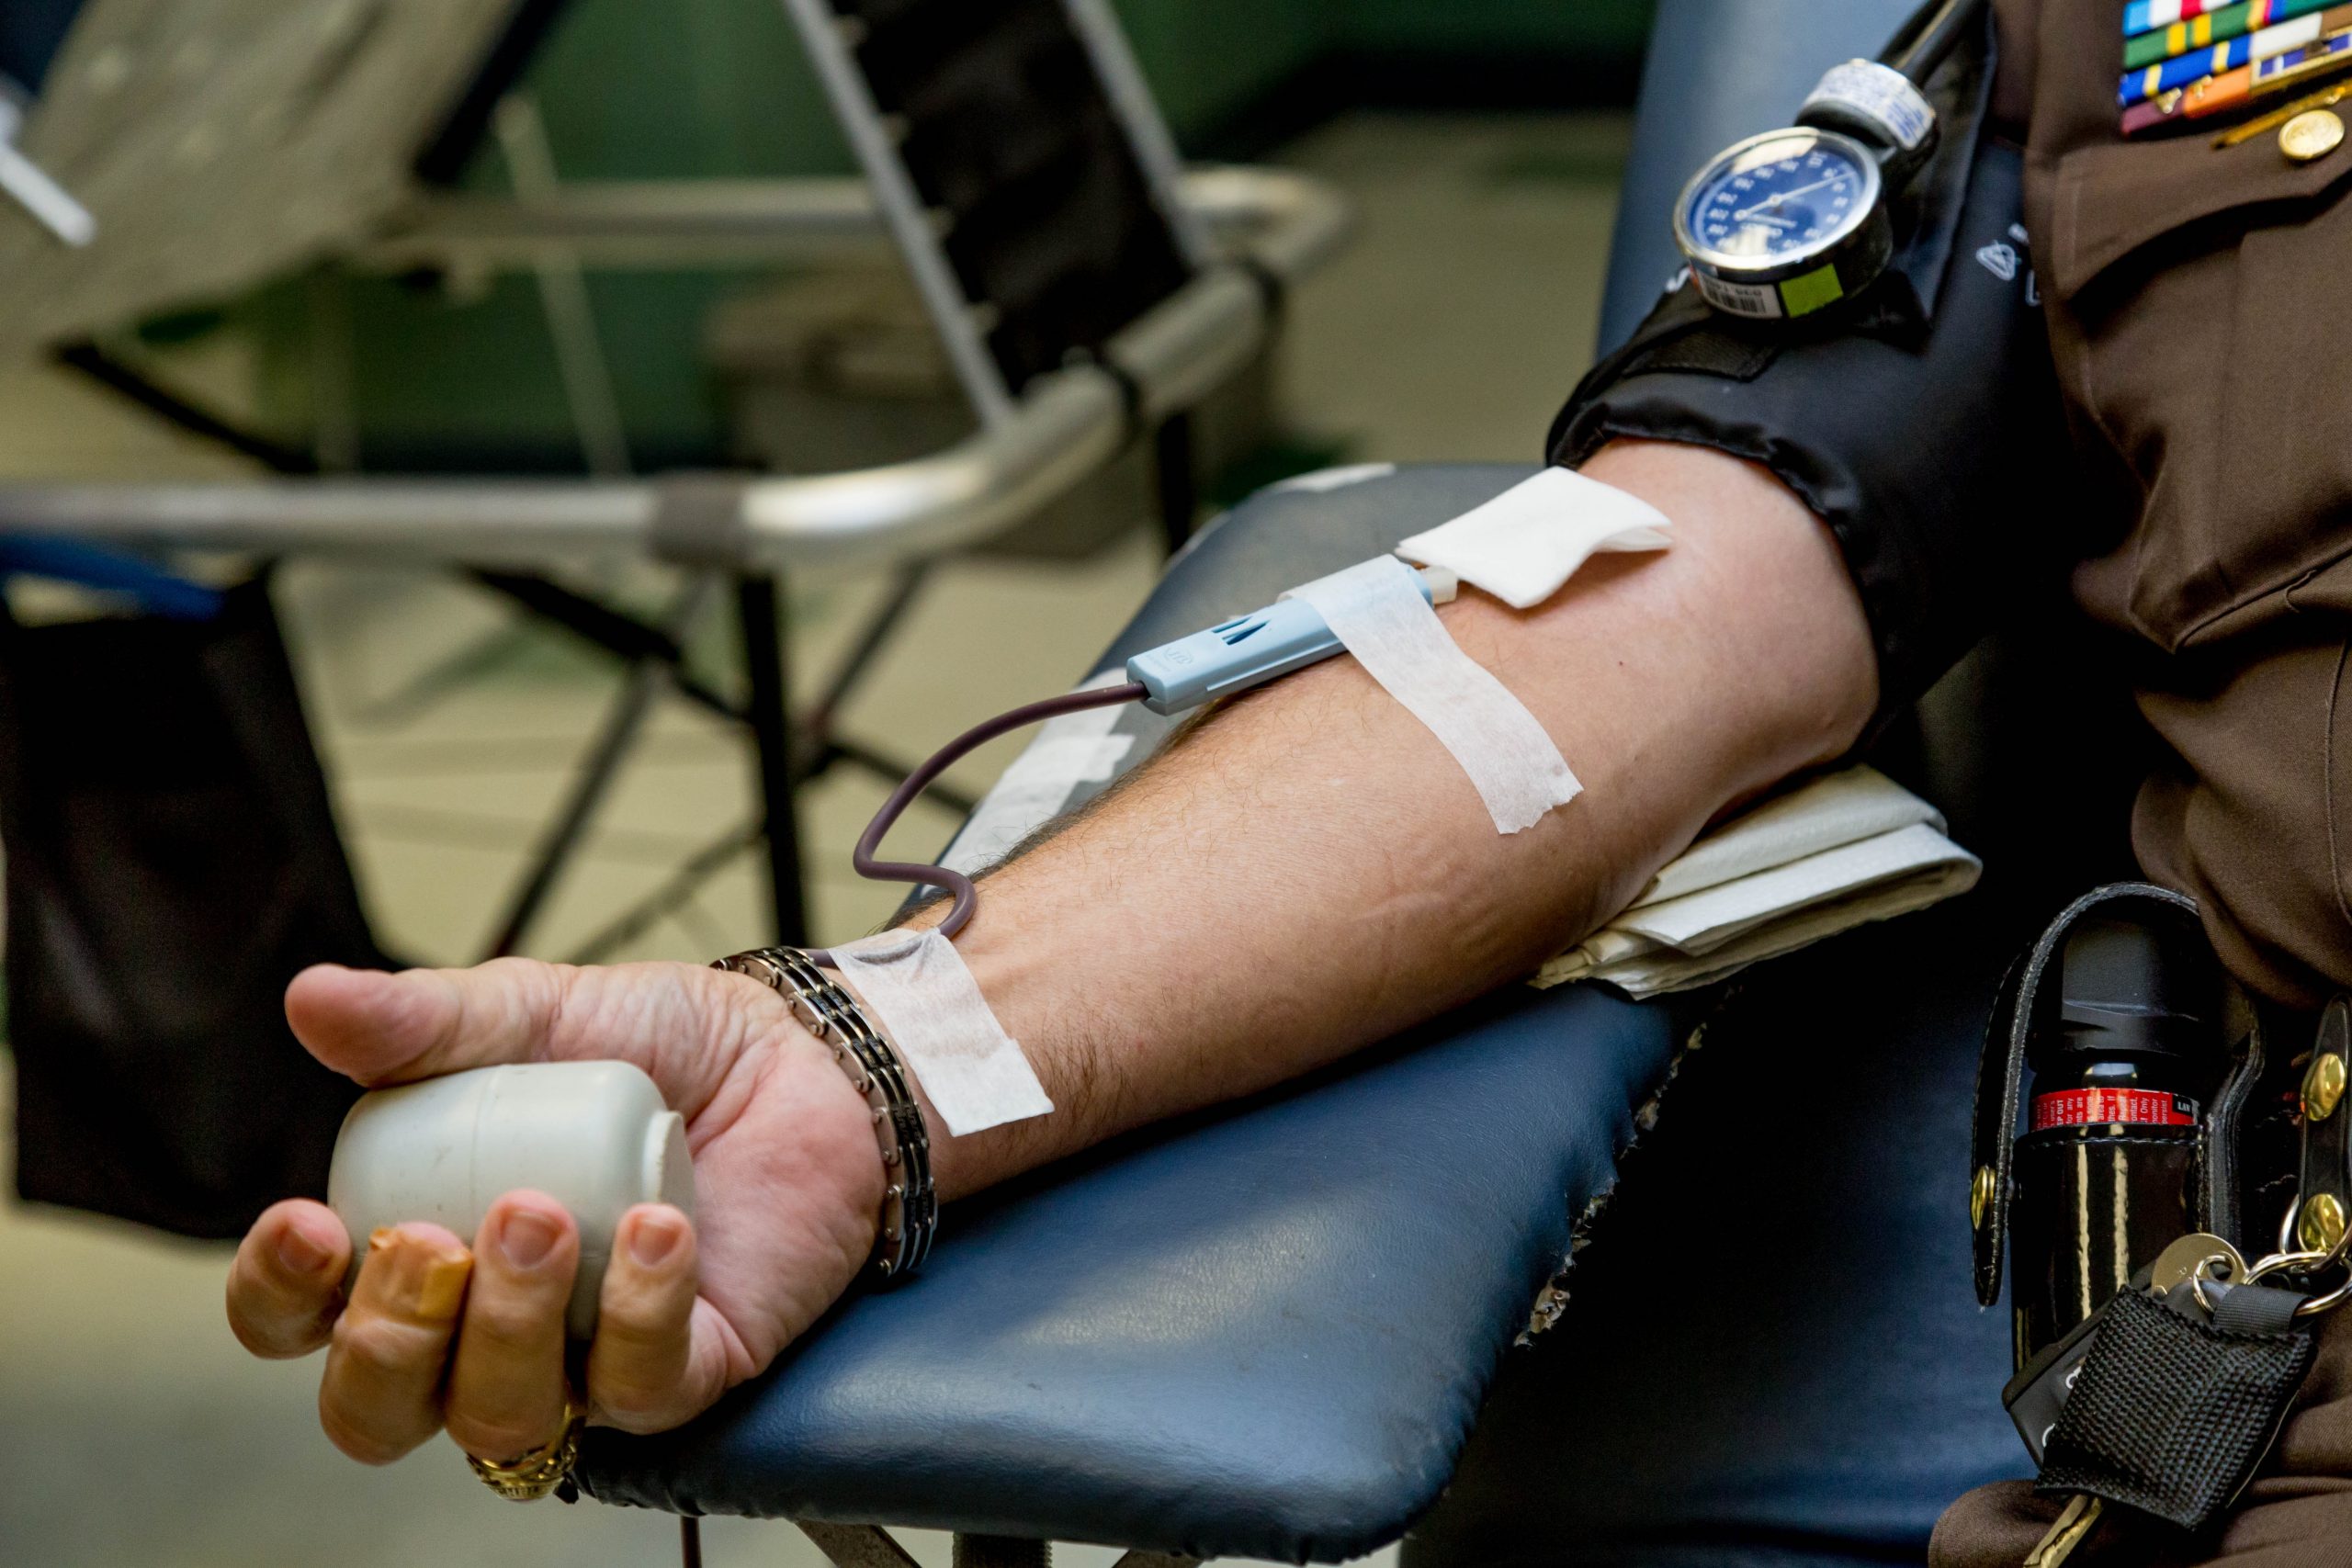 He has donated his own blood 632 times over the past 30 years. Image credit: LuAnn Hunt on Unsplash